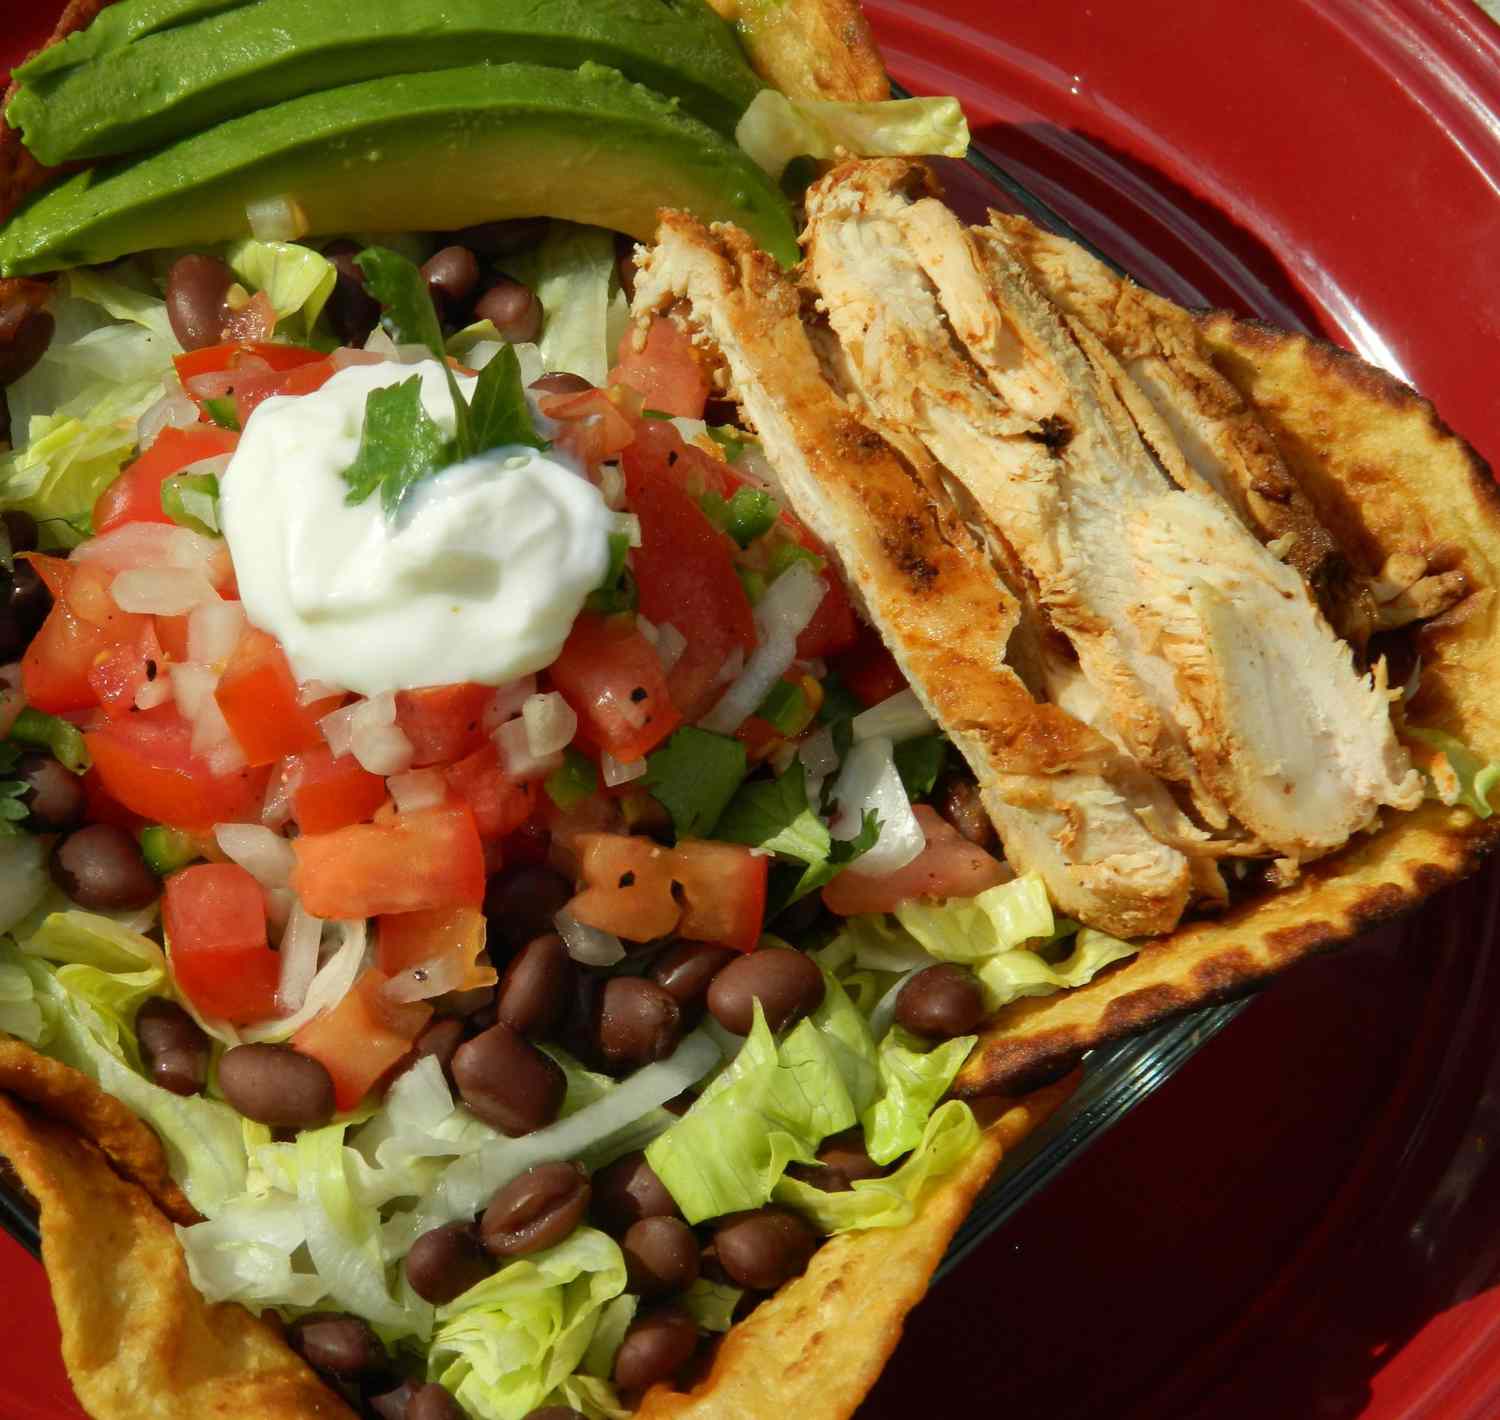 882280_Grilled Chicken Taco Salad_223029_Photo by Stirring Up Trouble